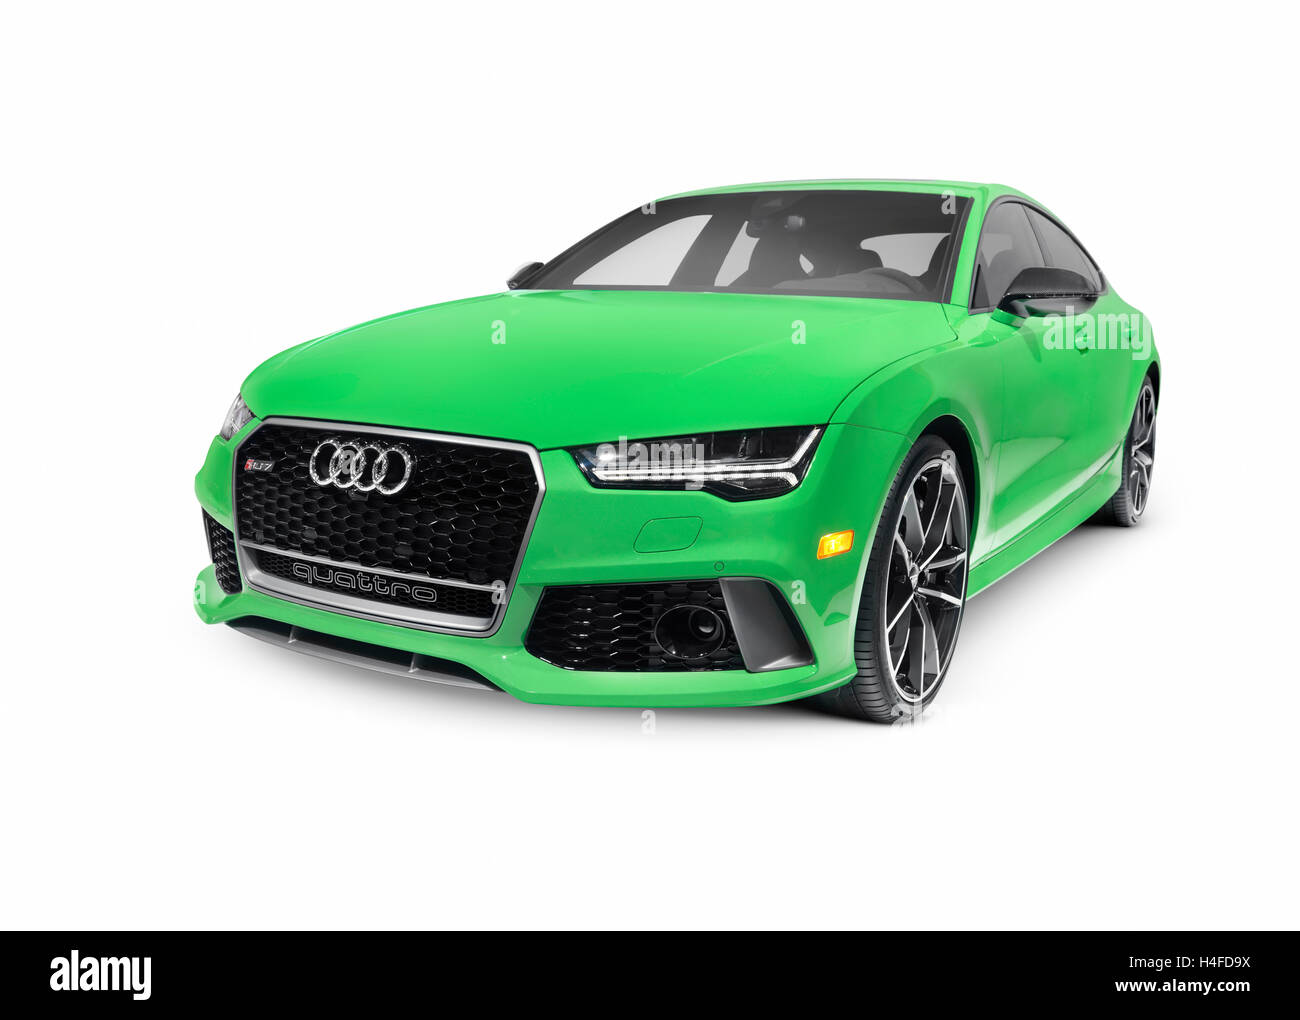 Audi car cars Cut Out Stock Images & Pictures - Alamy